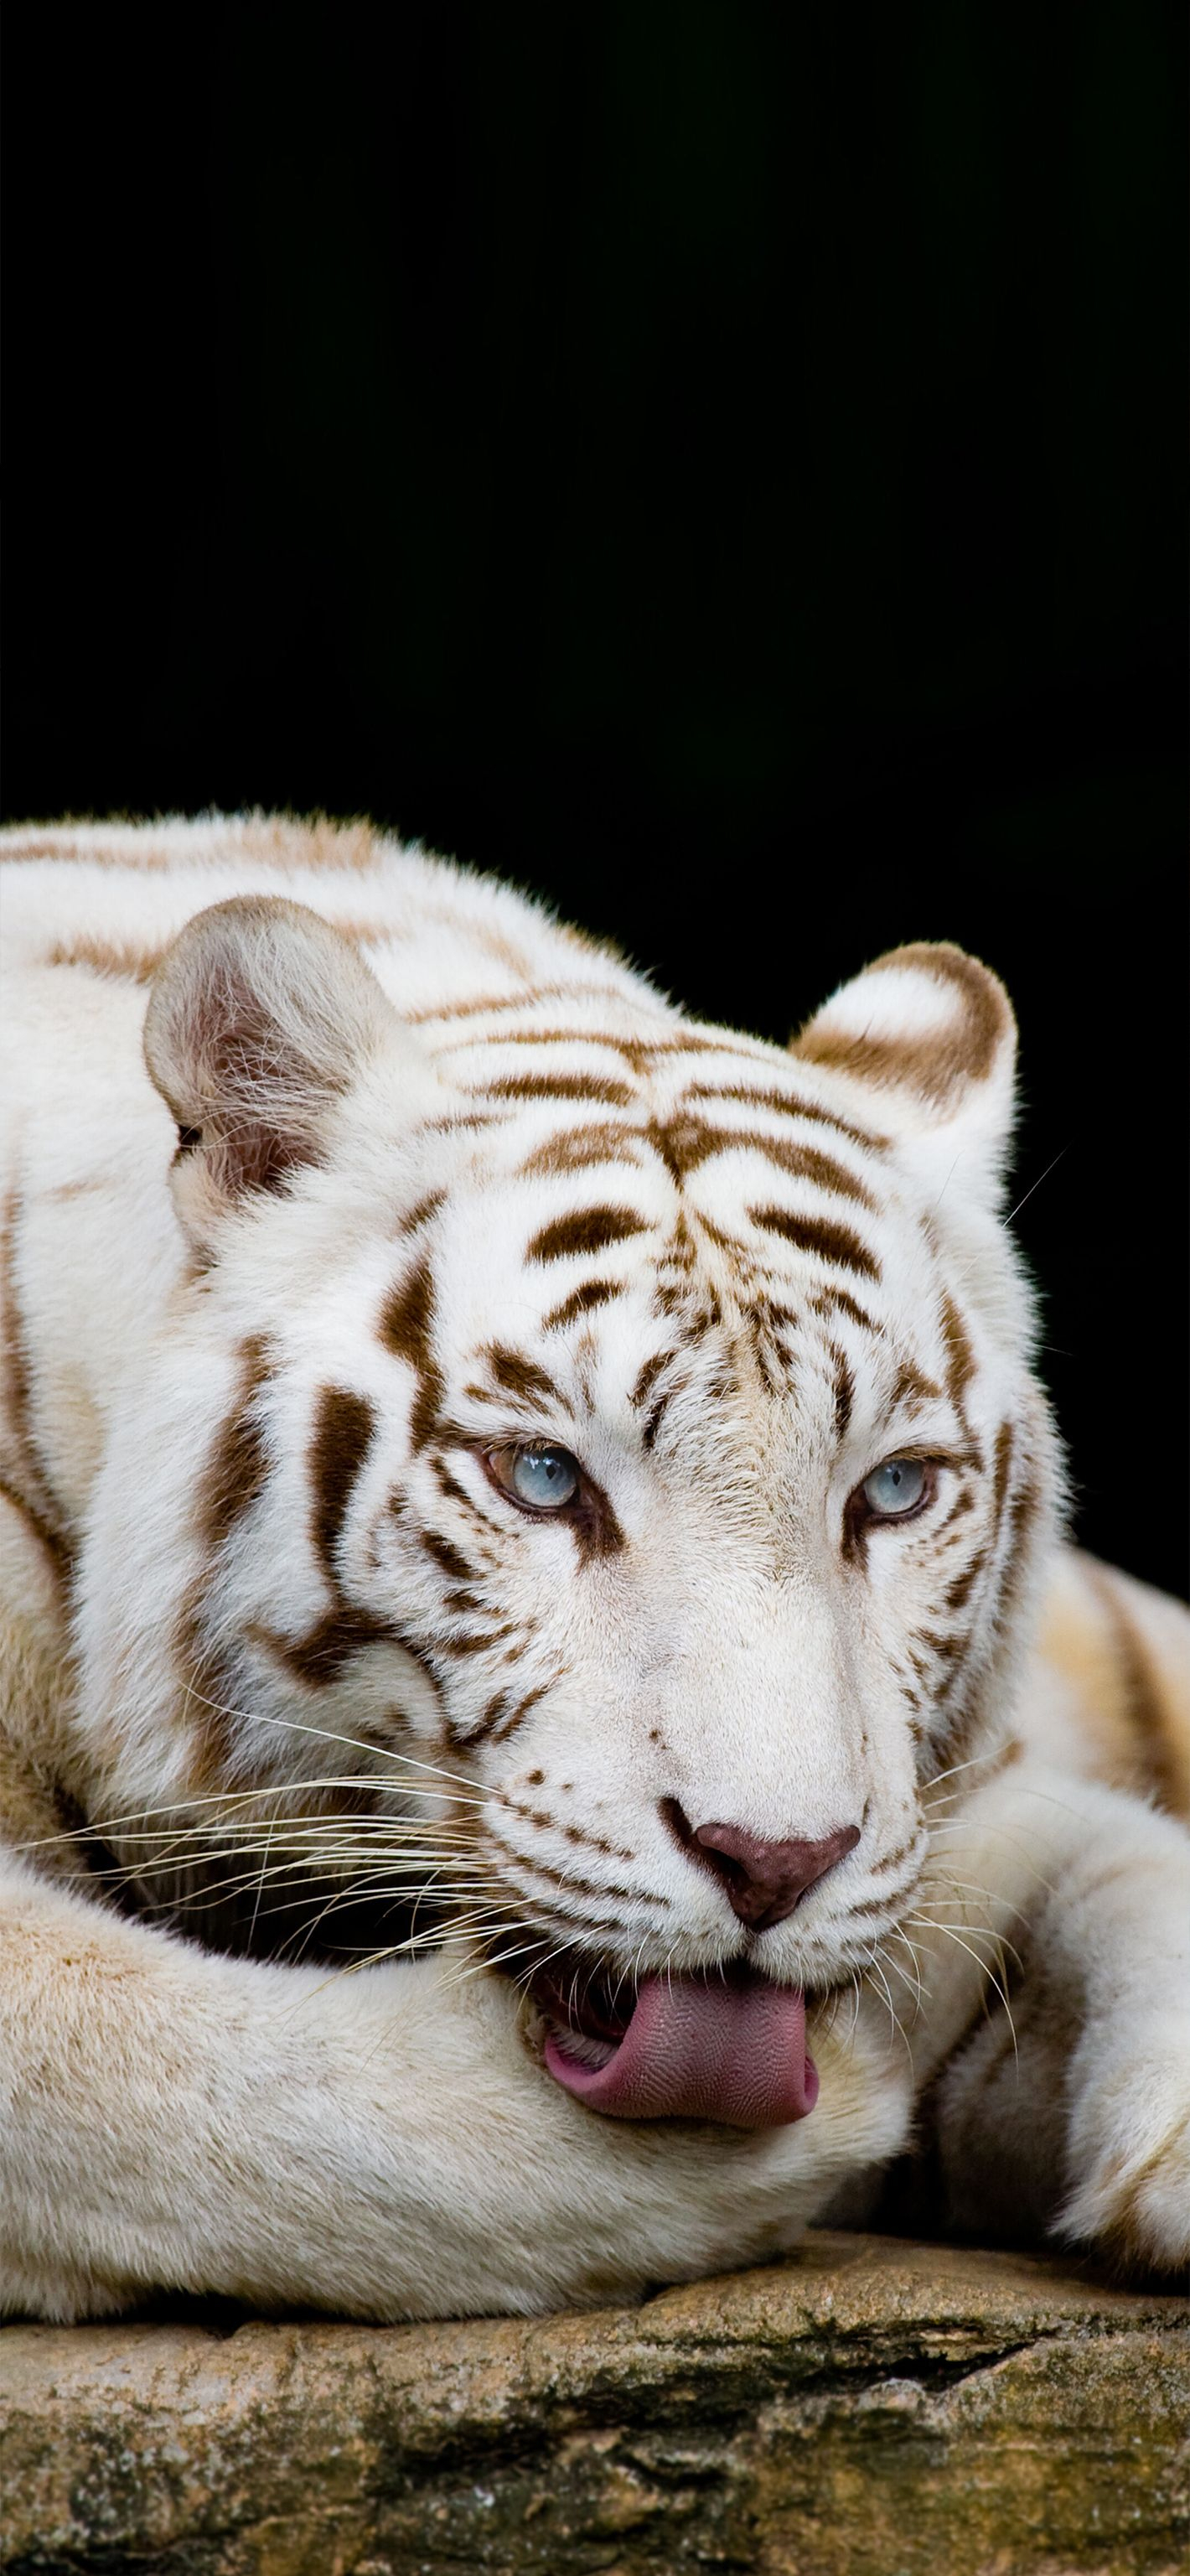 1420x3073 Tigre Bianca | Tiger wallpaper, White tiger, Baby animals pictures